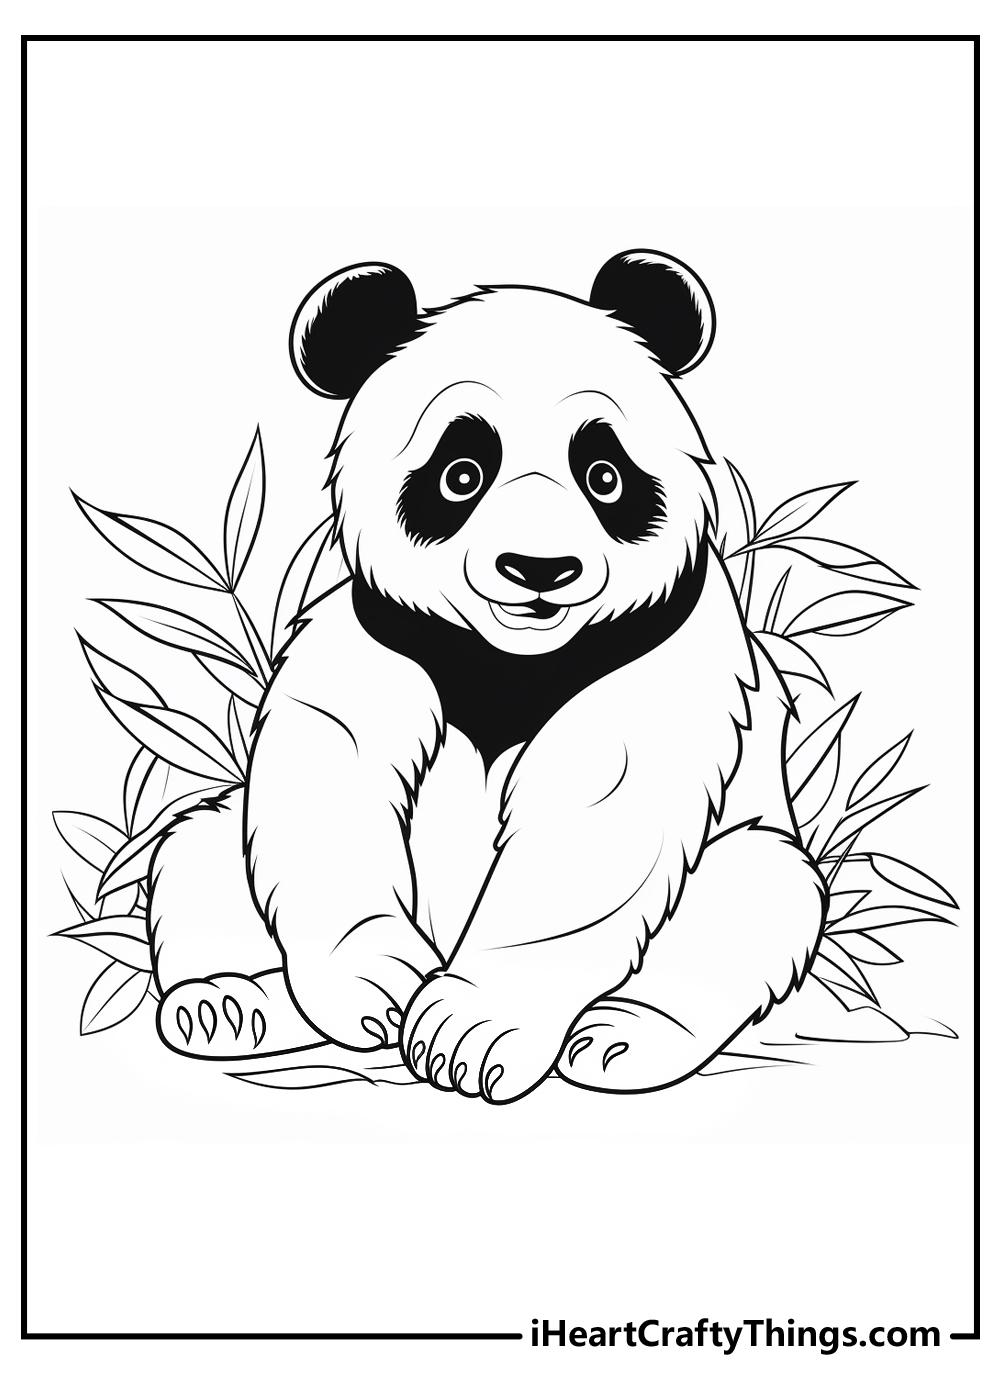 Giant panda coloring pages updated